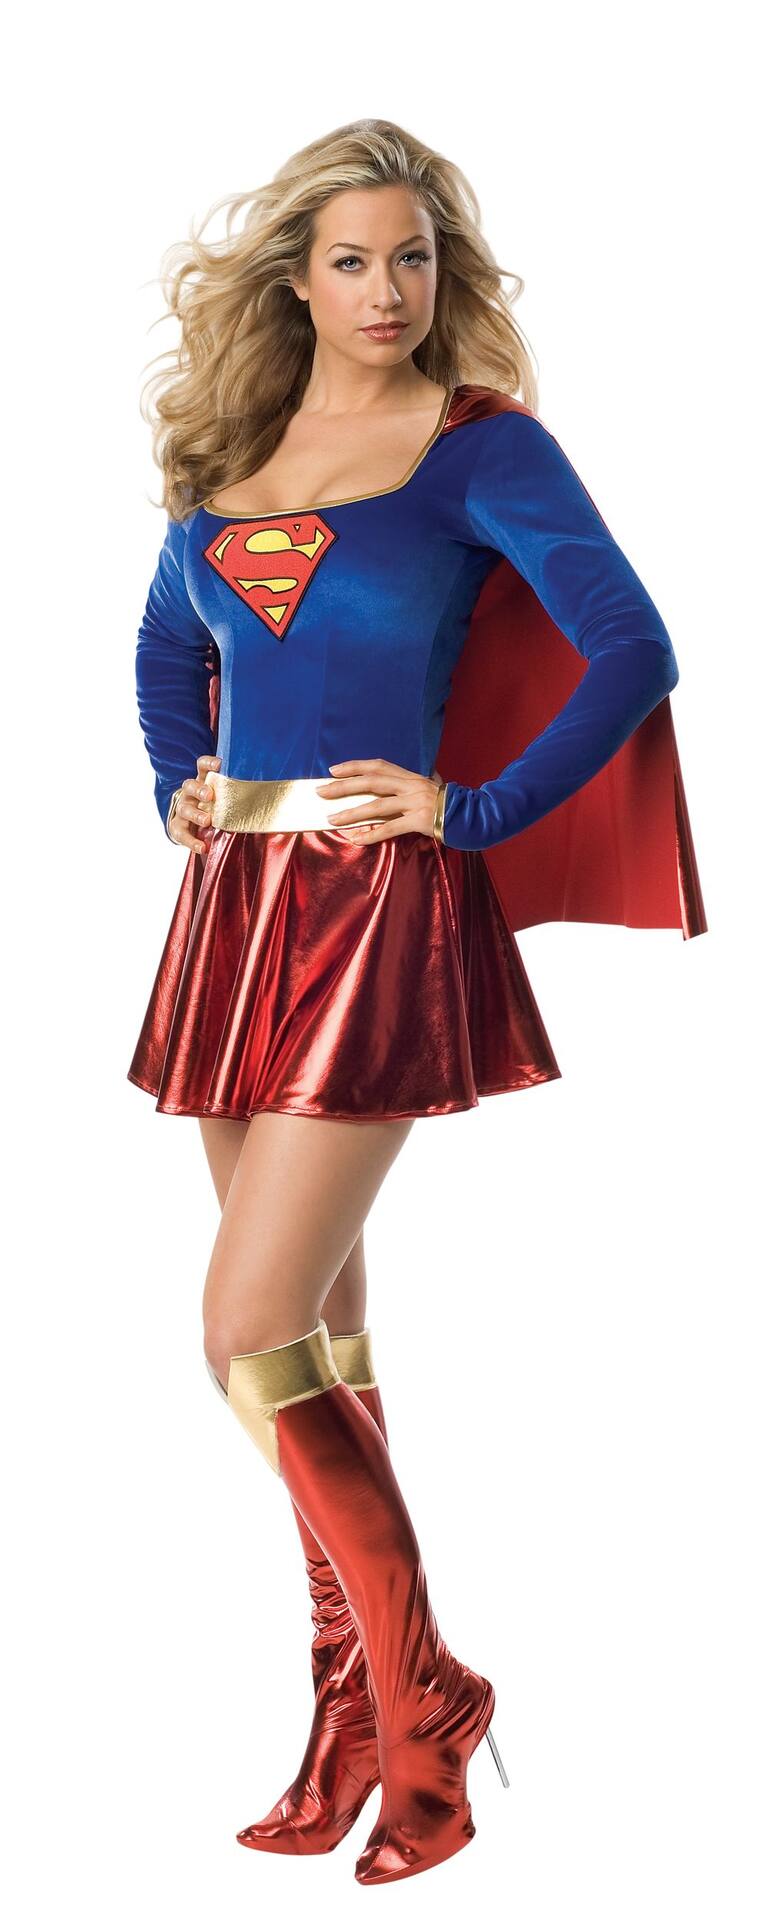 Suit Yourself Superman Supergirl Tights for Adults, One Size up to Women's  Size 6 to 8, Blue and Red with Gold Details